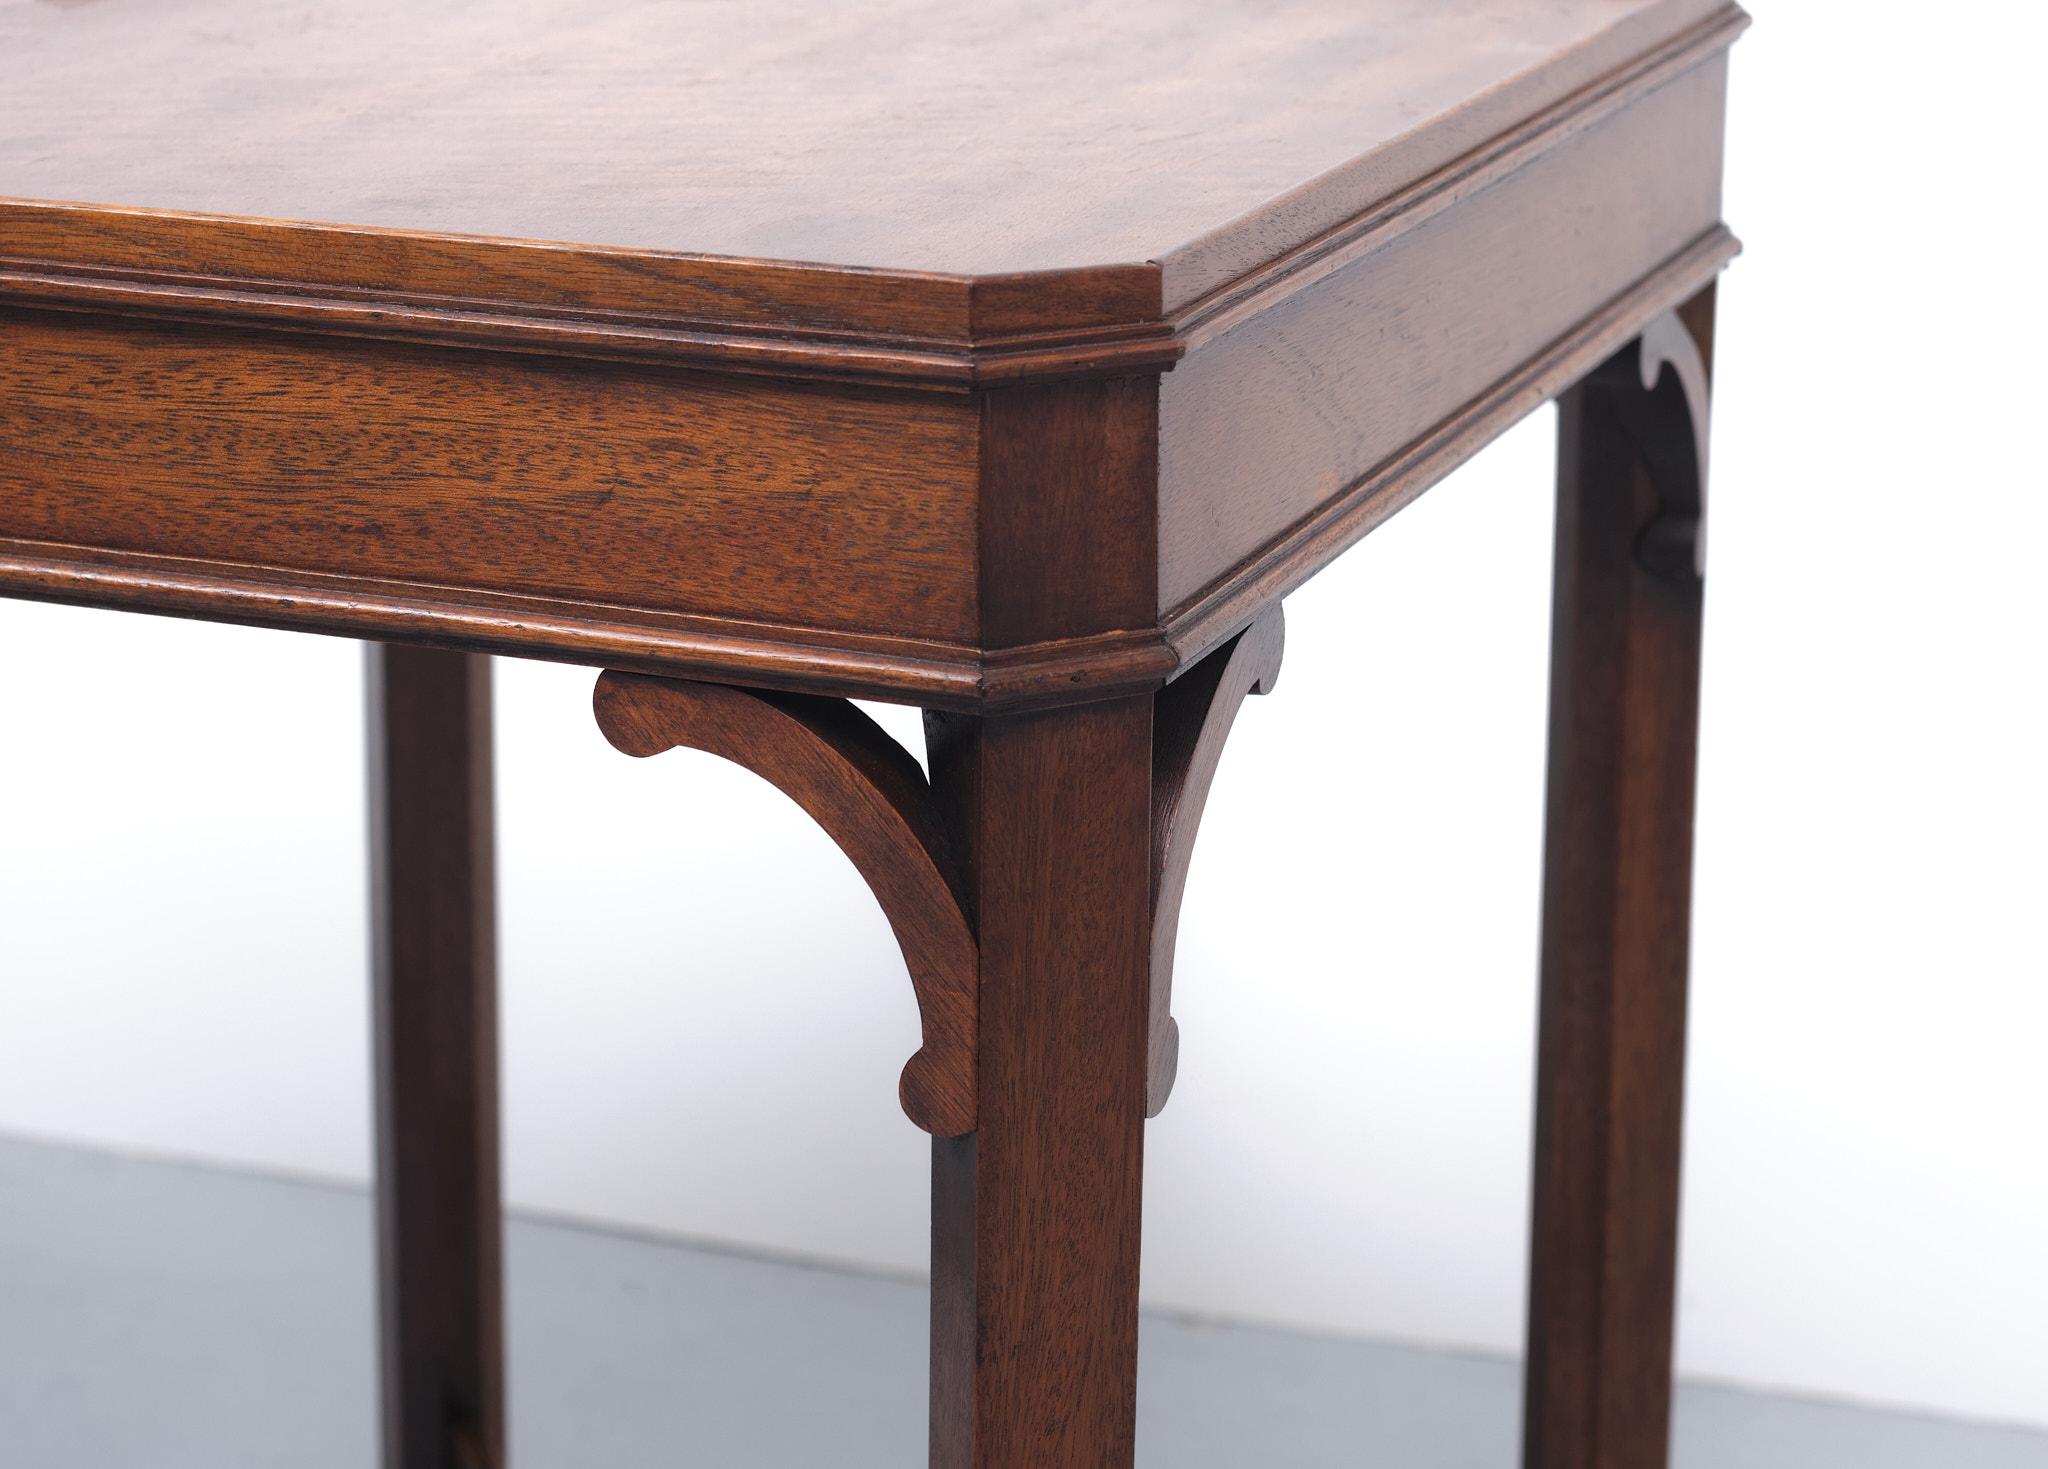 Bevan Funnell Mahogany Side Tables Georgian Revival England, 1960s For Sale 6